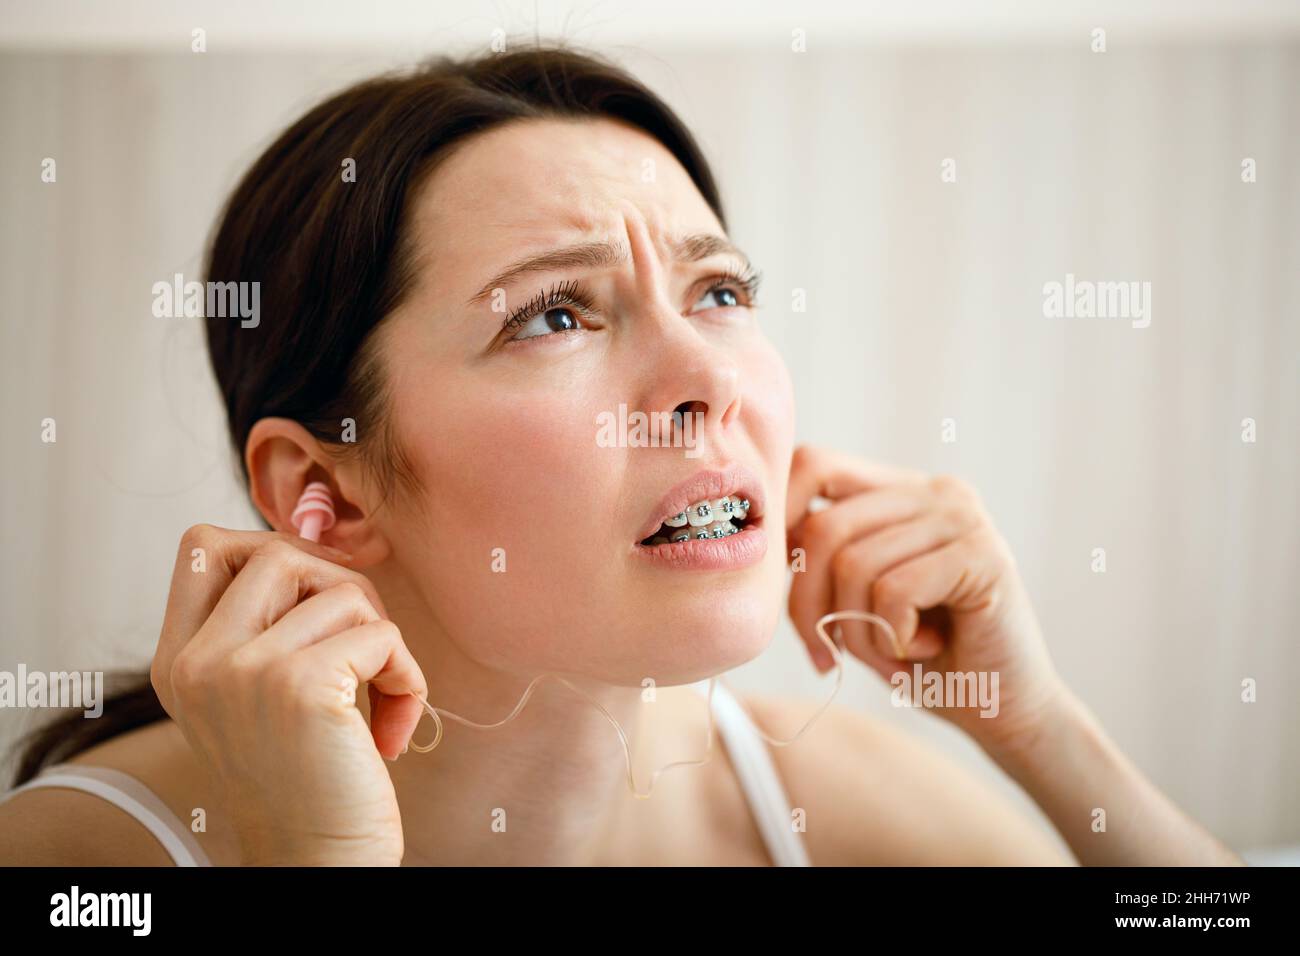 The woman covers her ears because of the loud noise. Noisy neighbors listen to loud music and interfere with sleep. Using earplugs. Stock Photo